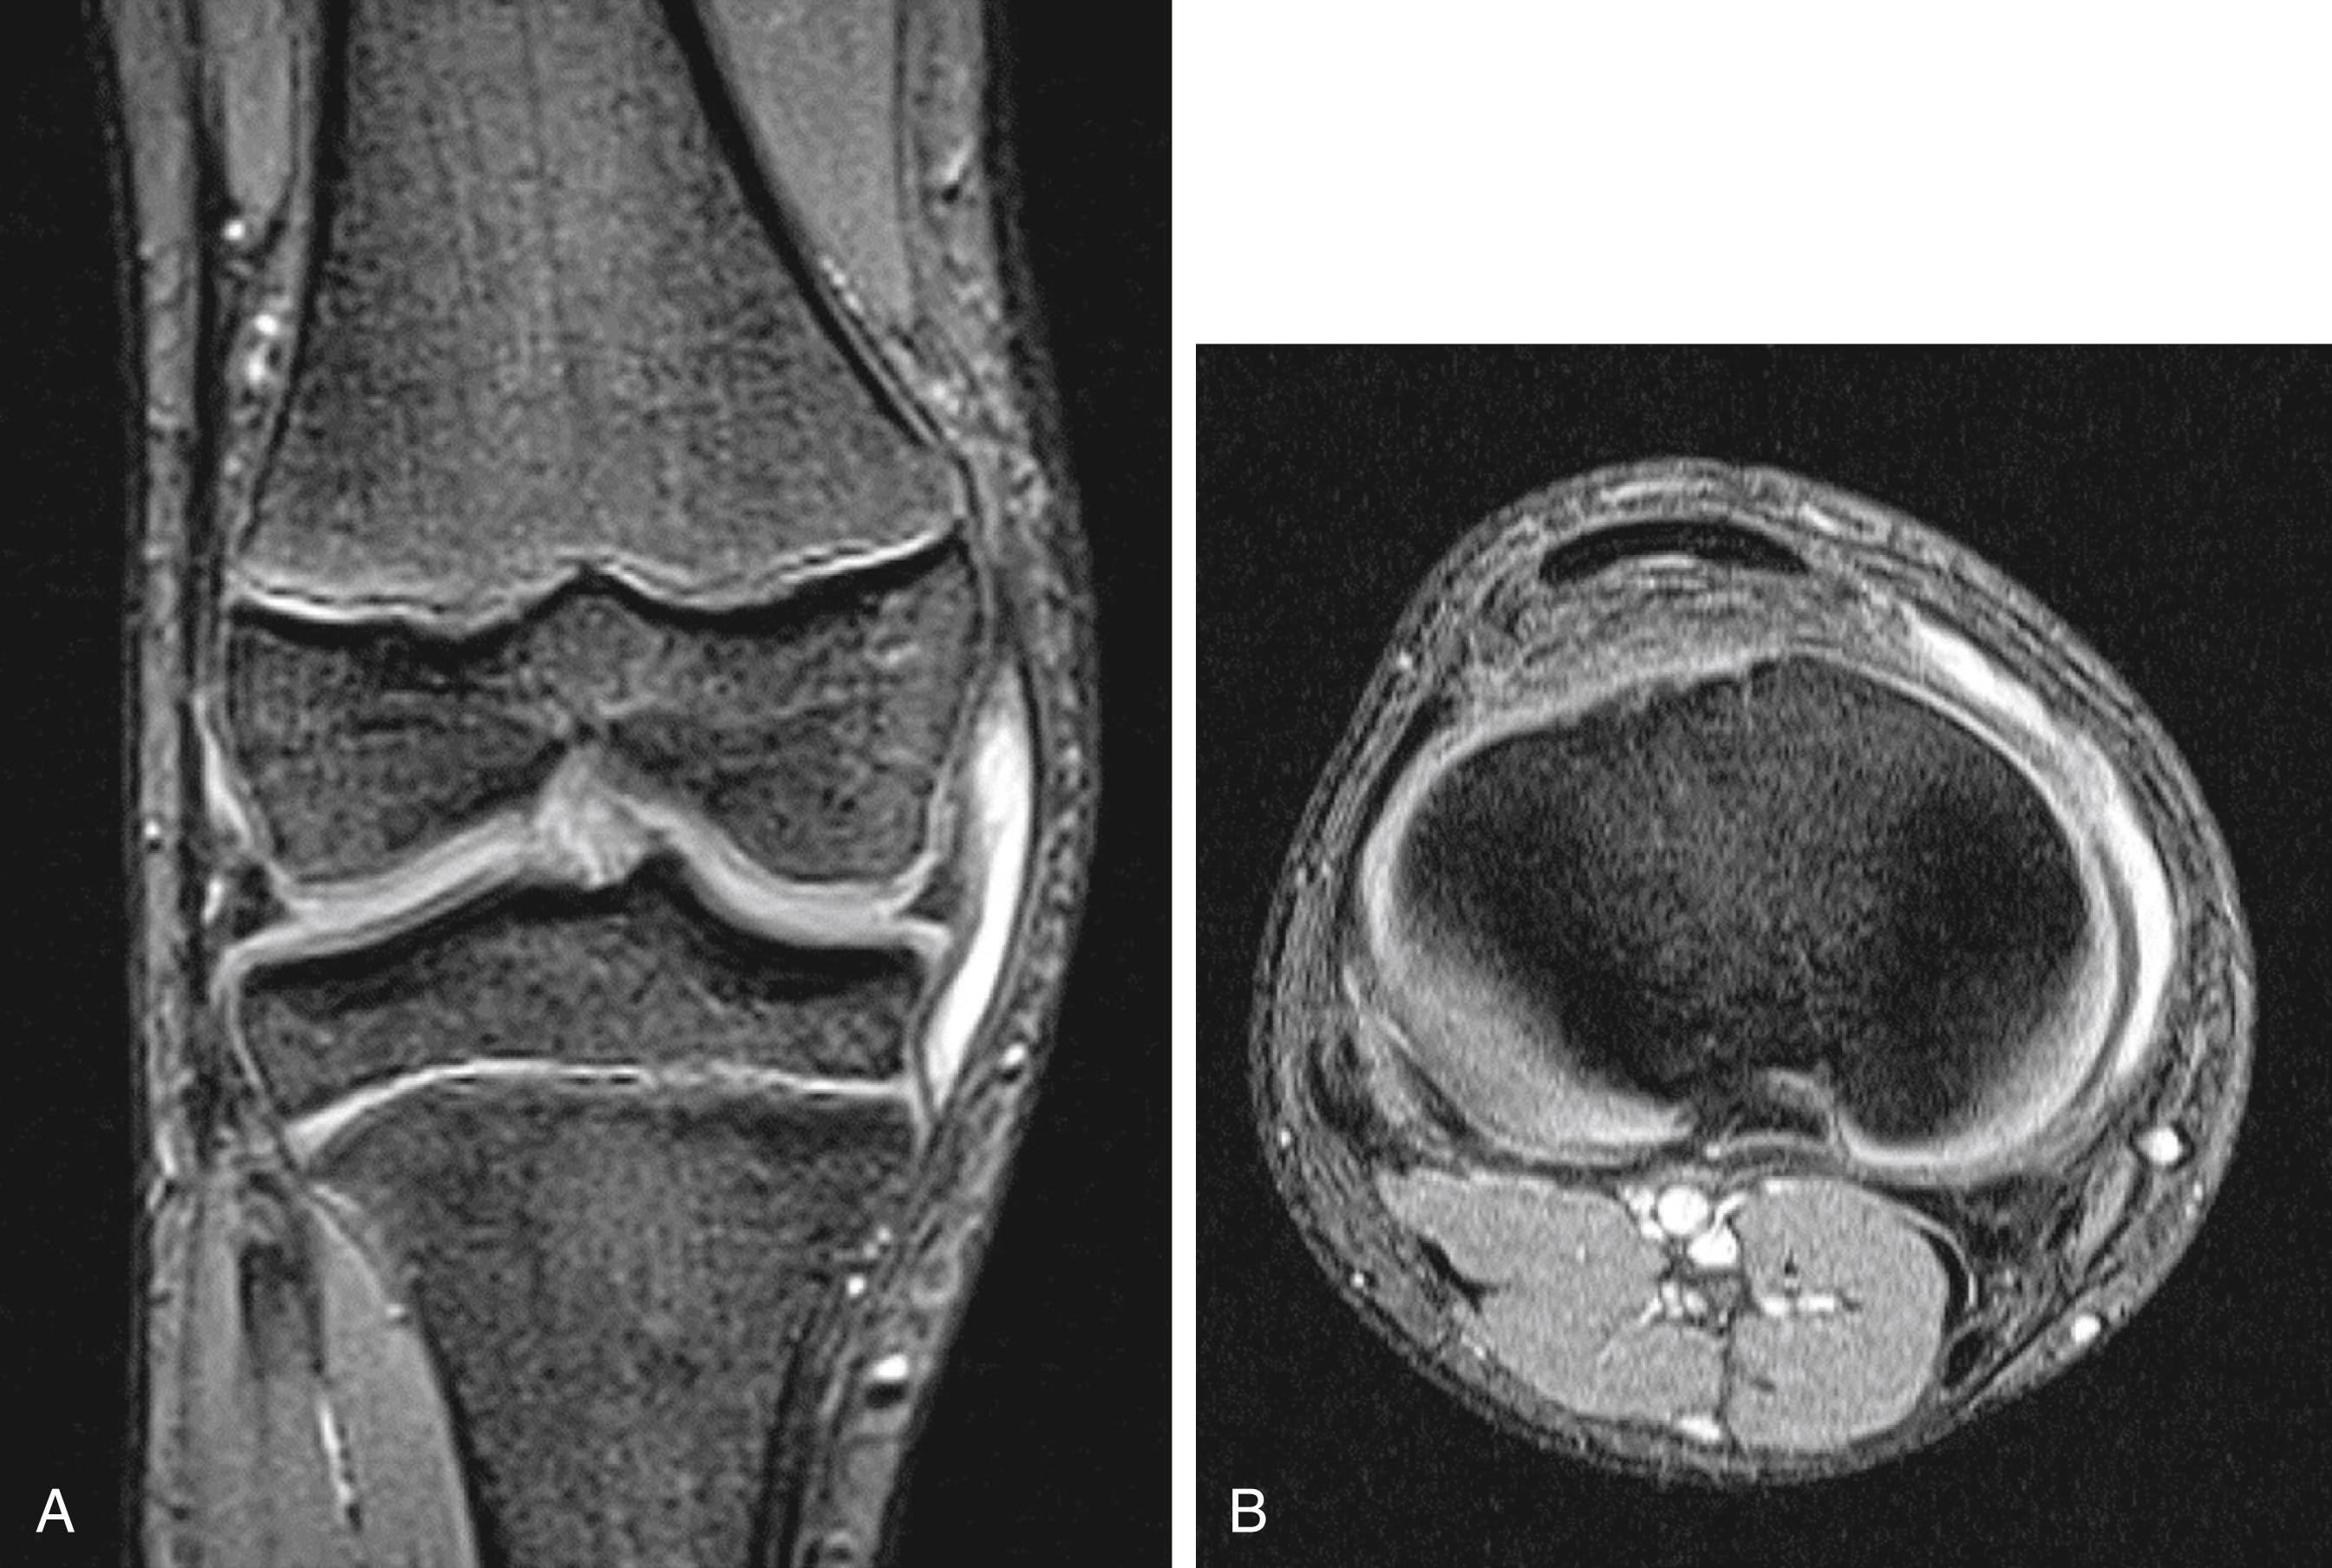 FIG. 163.4, A, Coronal T2-weighted image through the right knee showing a band of increased signal (fluid) between the joint capsule and the medial collateral ligament (MCL) . B, Axial T2-weighted image showing high signal (fluid) between the capsule and the MCL.